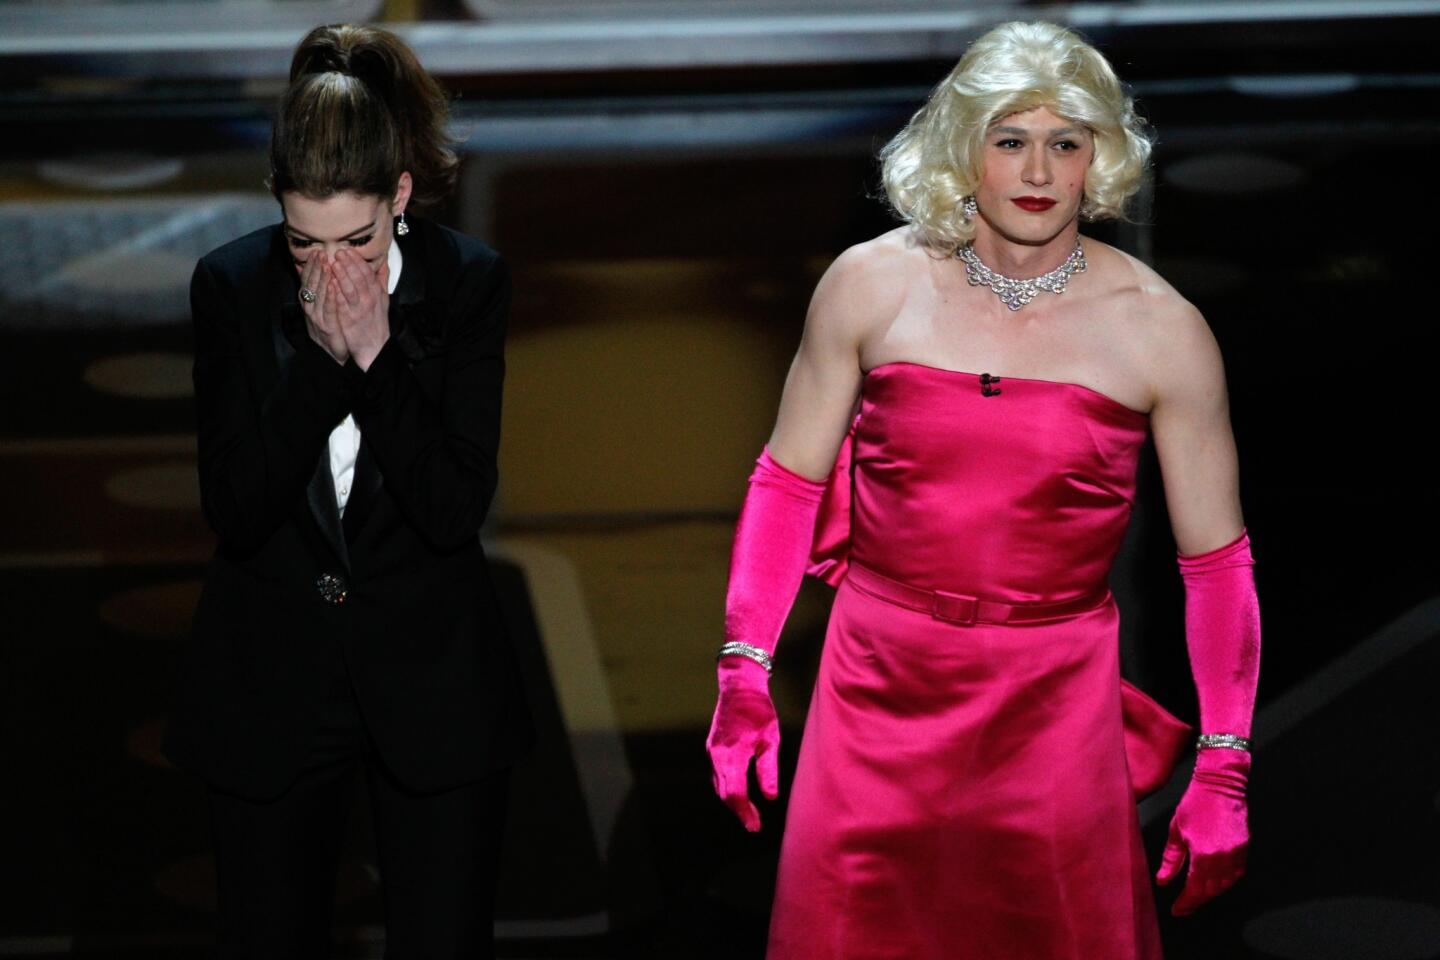 Awkward Oscar fashion moments: the fall before the wedgie